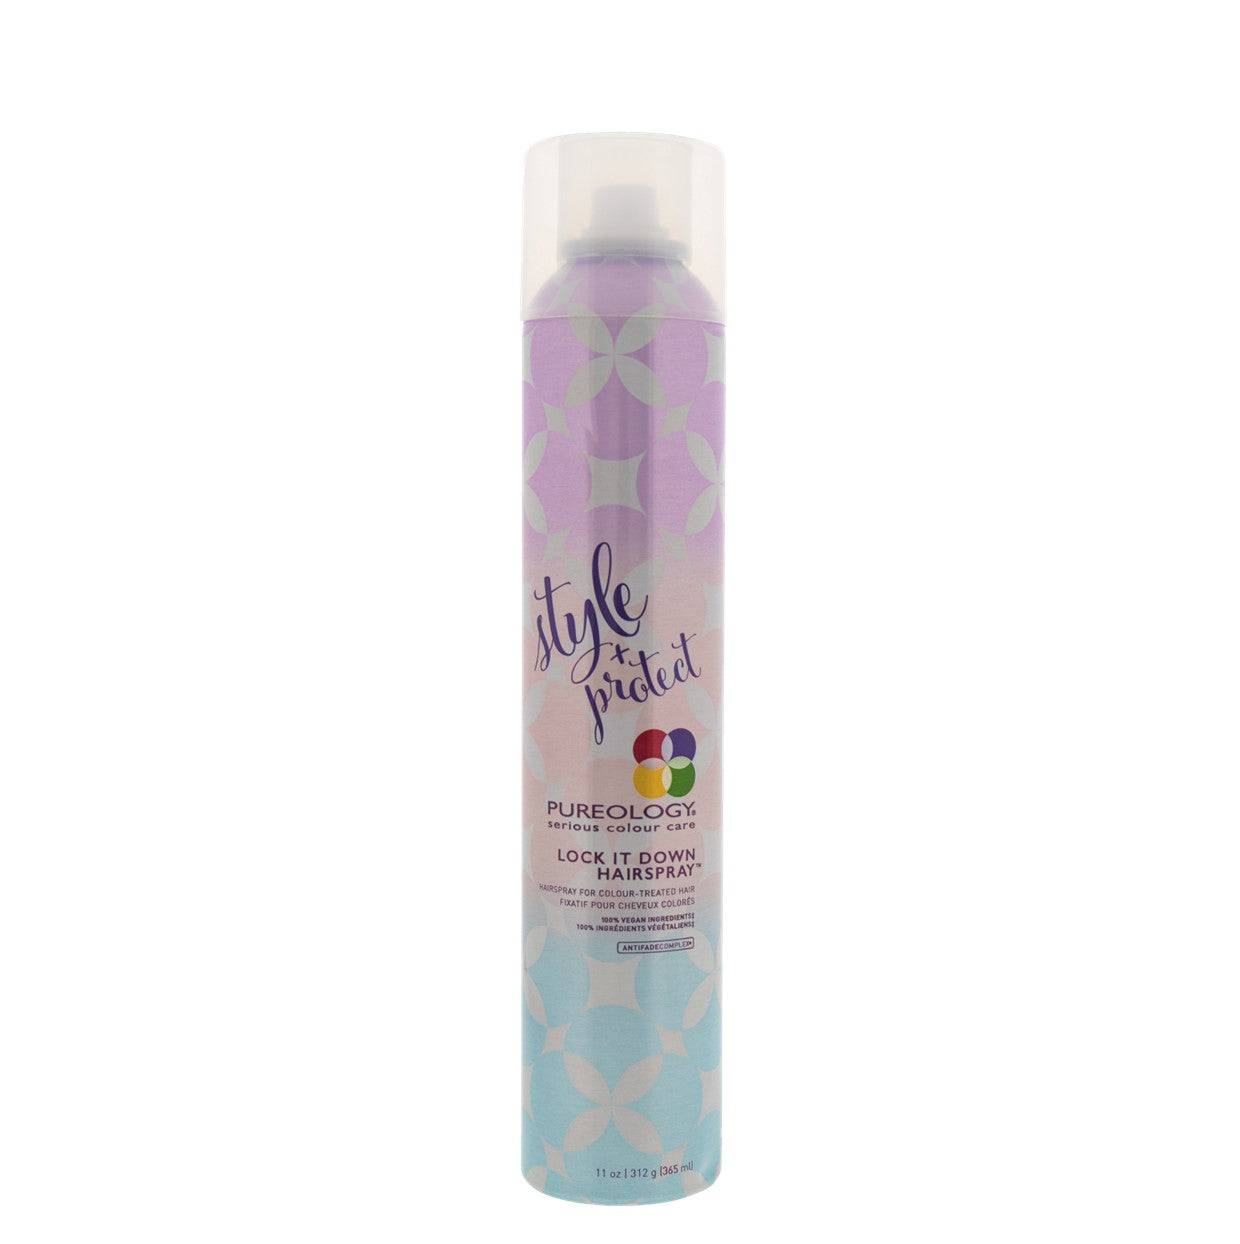 Pureology Style + Protect Lock it down Hairspray 312 g Workable Finish Vegan Pureology - On Line Hair Depot